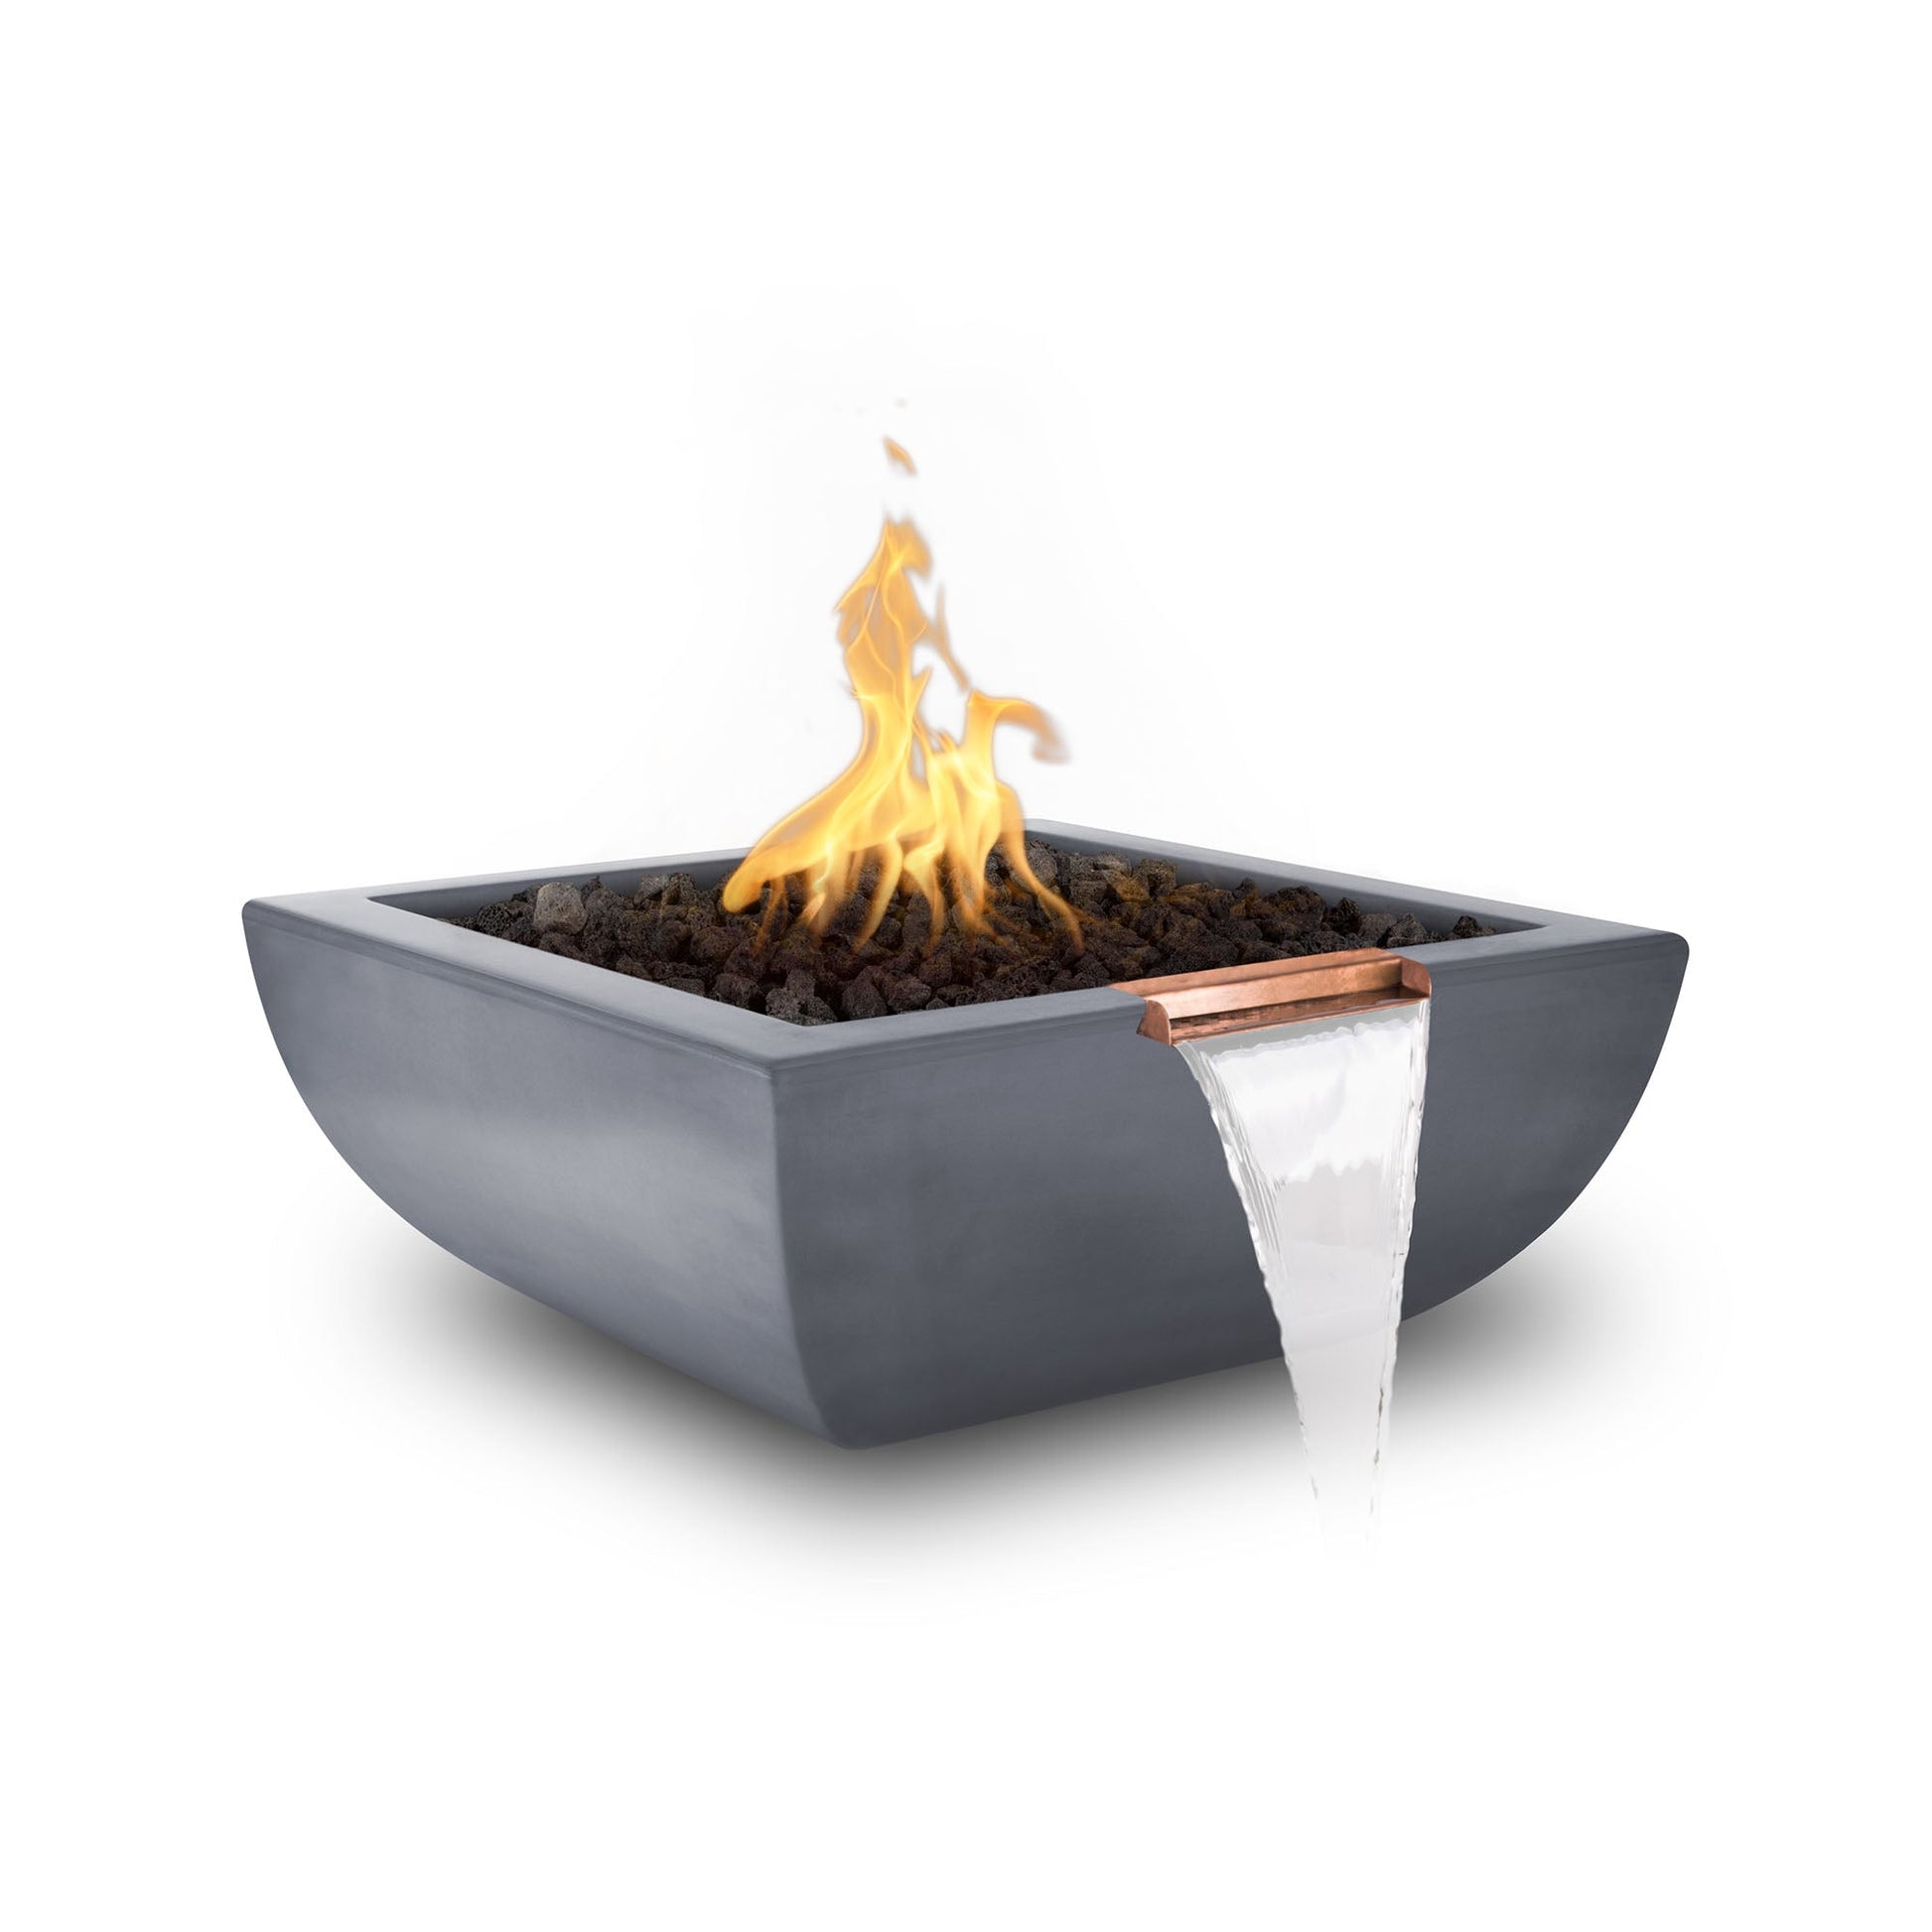 The Outdoor Plus Square Avalon 36" Metallic Pearl GFRC Concrete Liquid Propane Fire & Water Bowl with Match Lit with Flame Sense Ignition